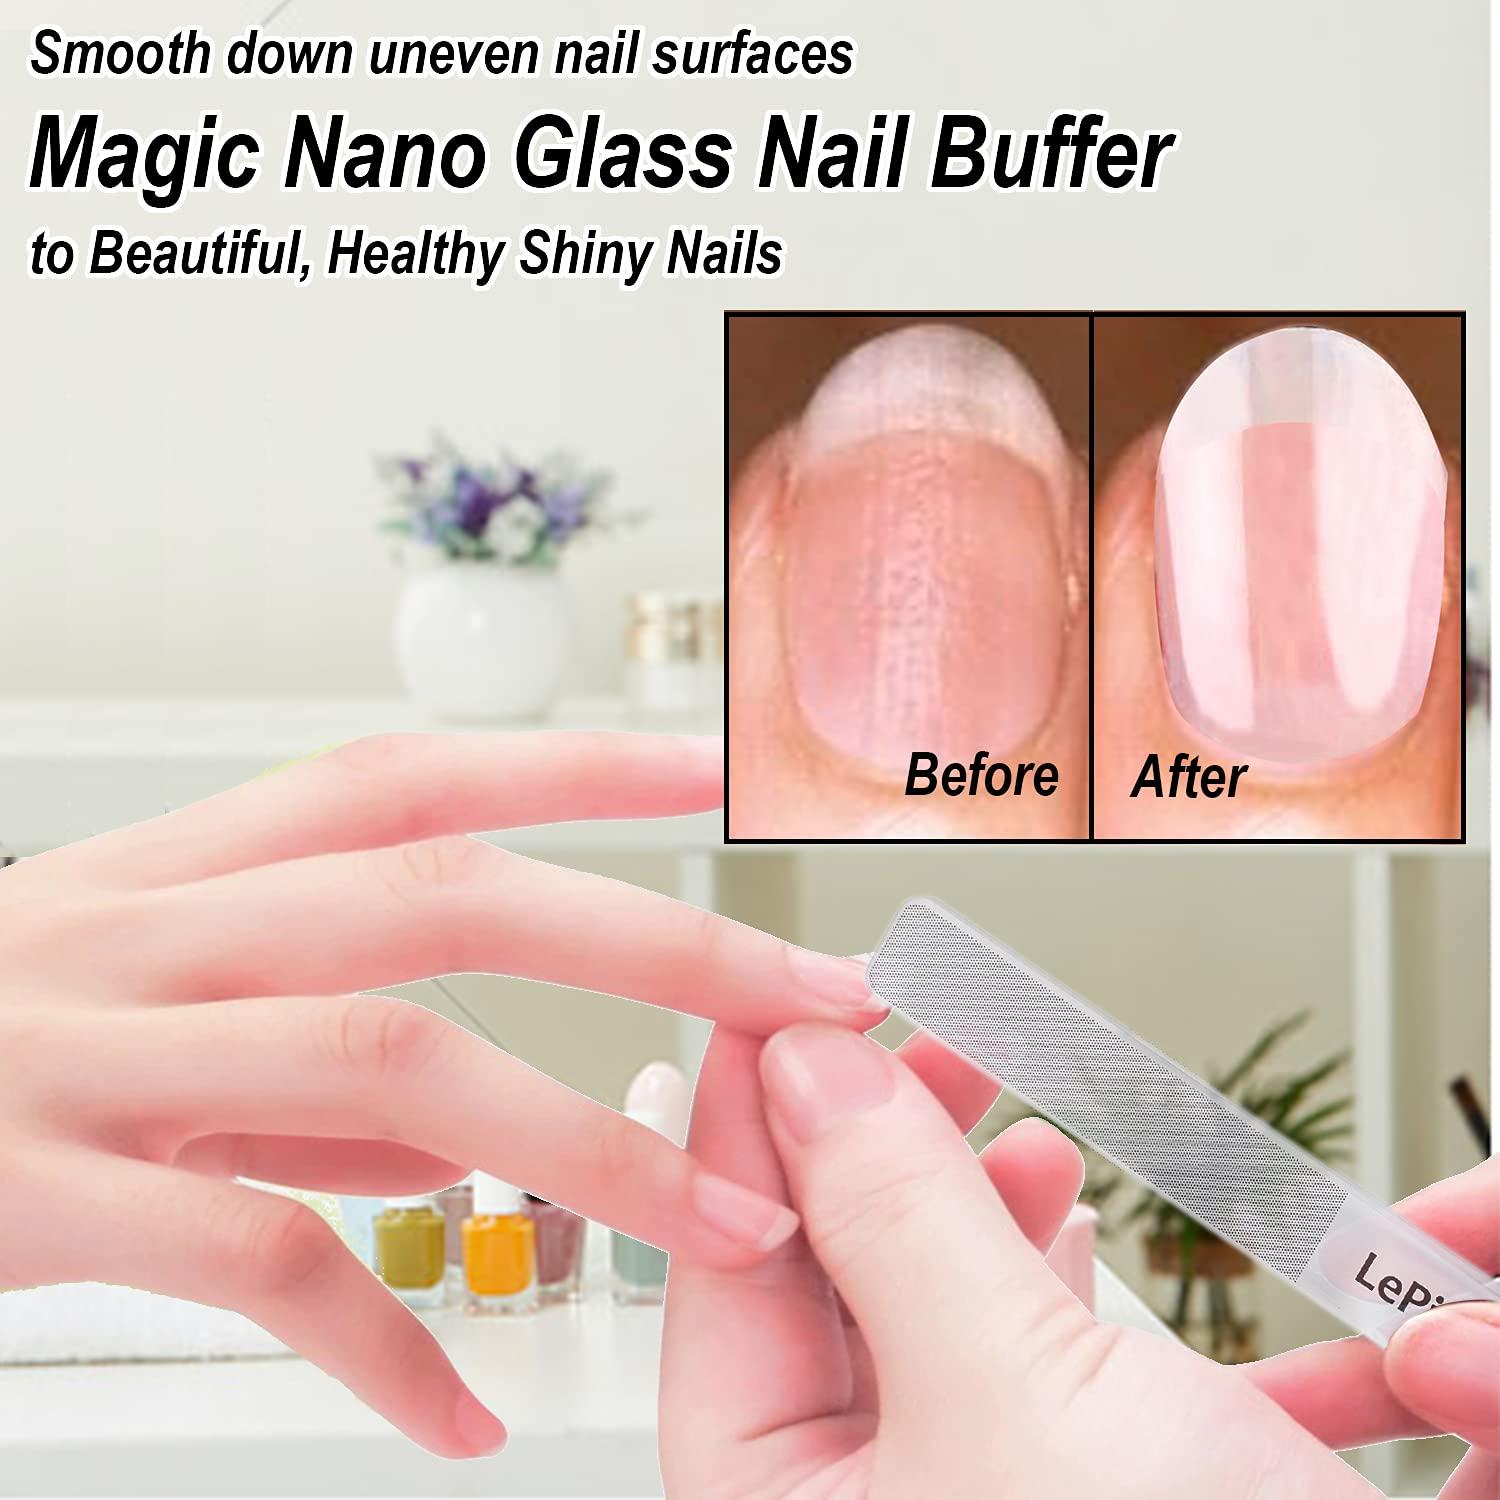 Long Lasting Nail File and Buffer Set, 1 Diamond Metal Nail File with 1  Nano Glass Nail Buffer, Professional Manicure Tools Kit for Home and Salon  Use